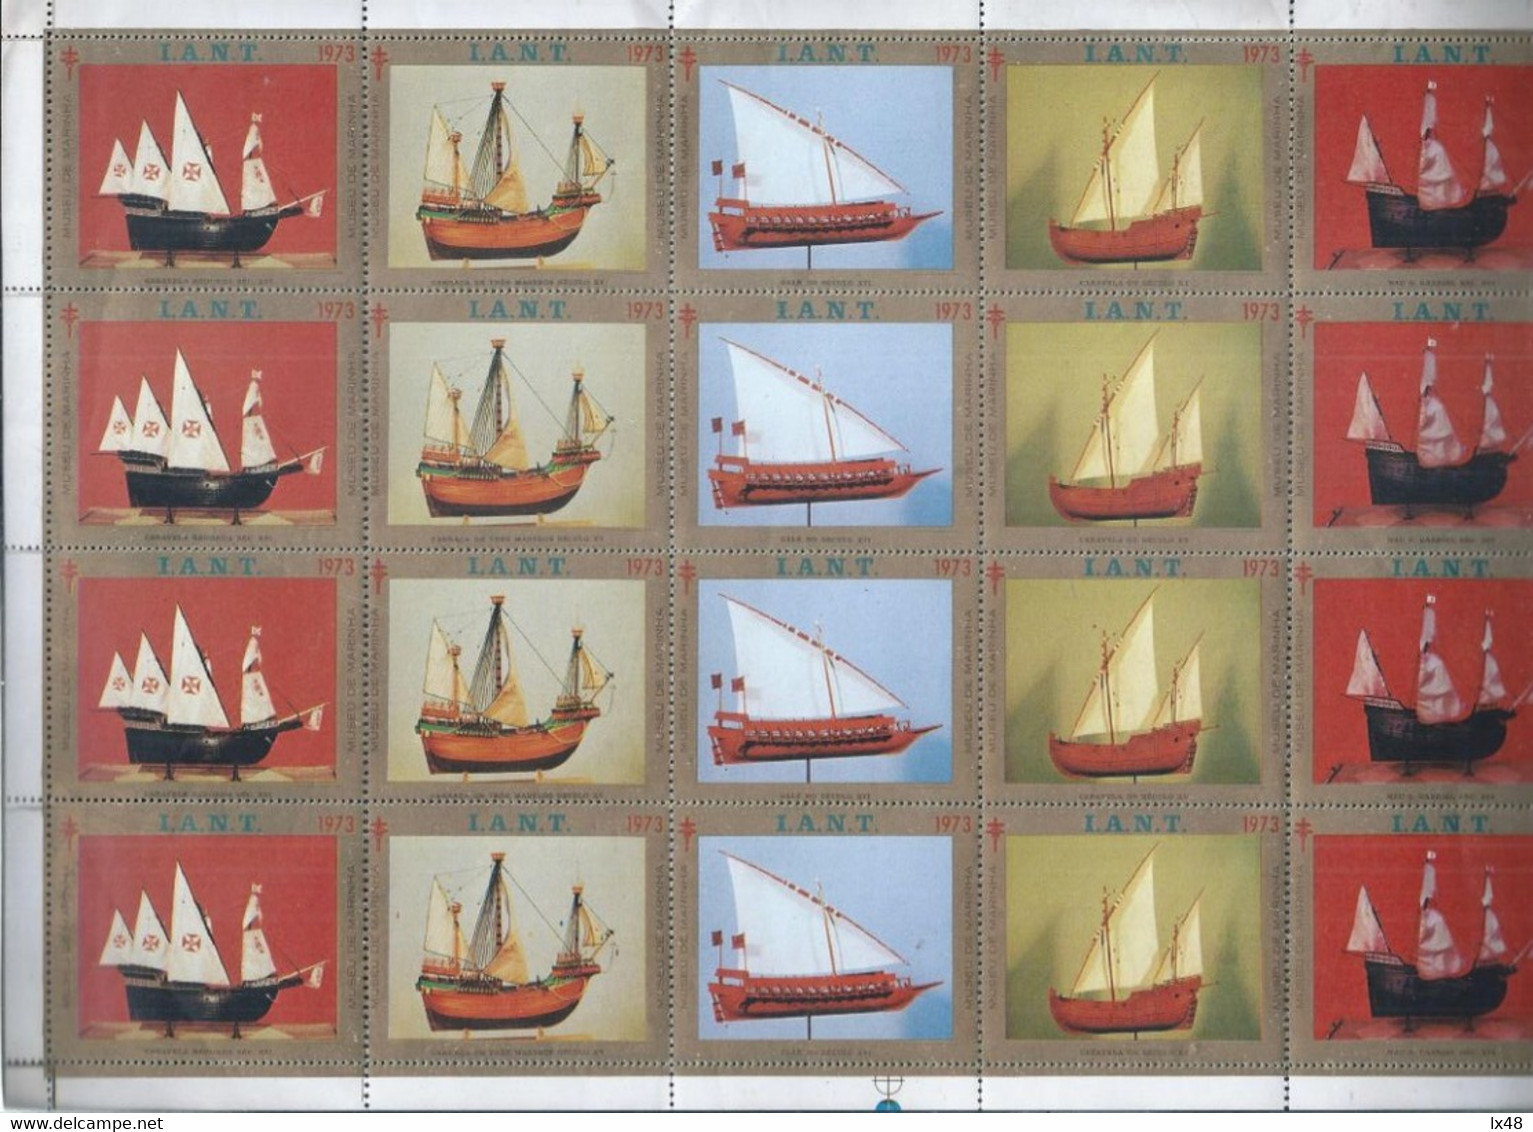 Tuberculosis. Tuberkulose. Sheet 20 Boat Vignettes From Navy Museum. Caravels And Ships 15th And 16th Centuries. Rare - Local Post Stamps